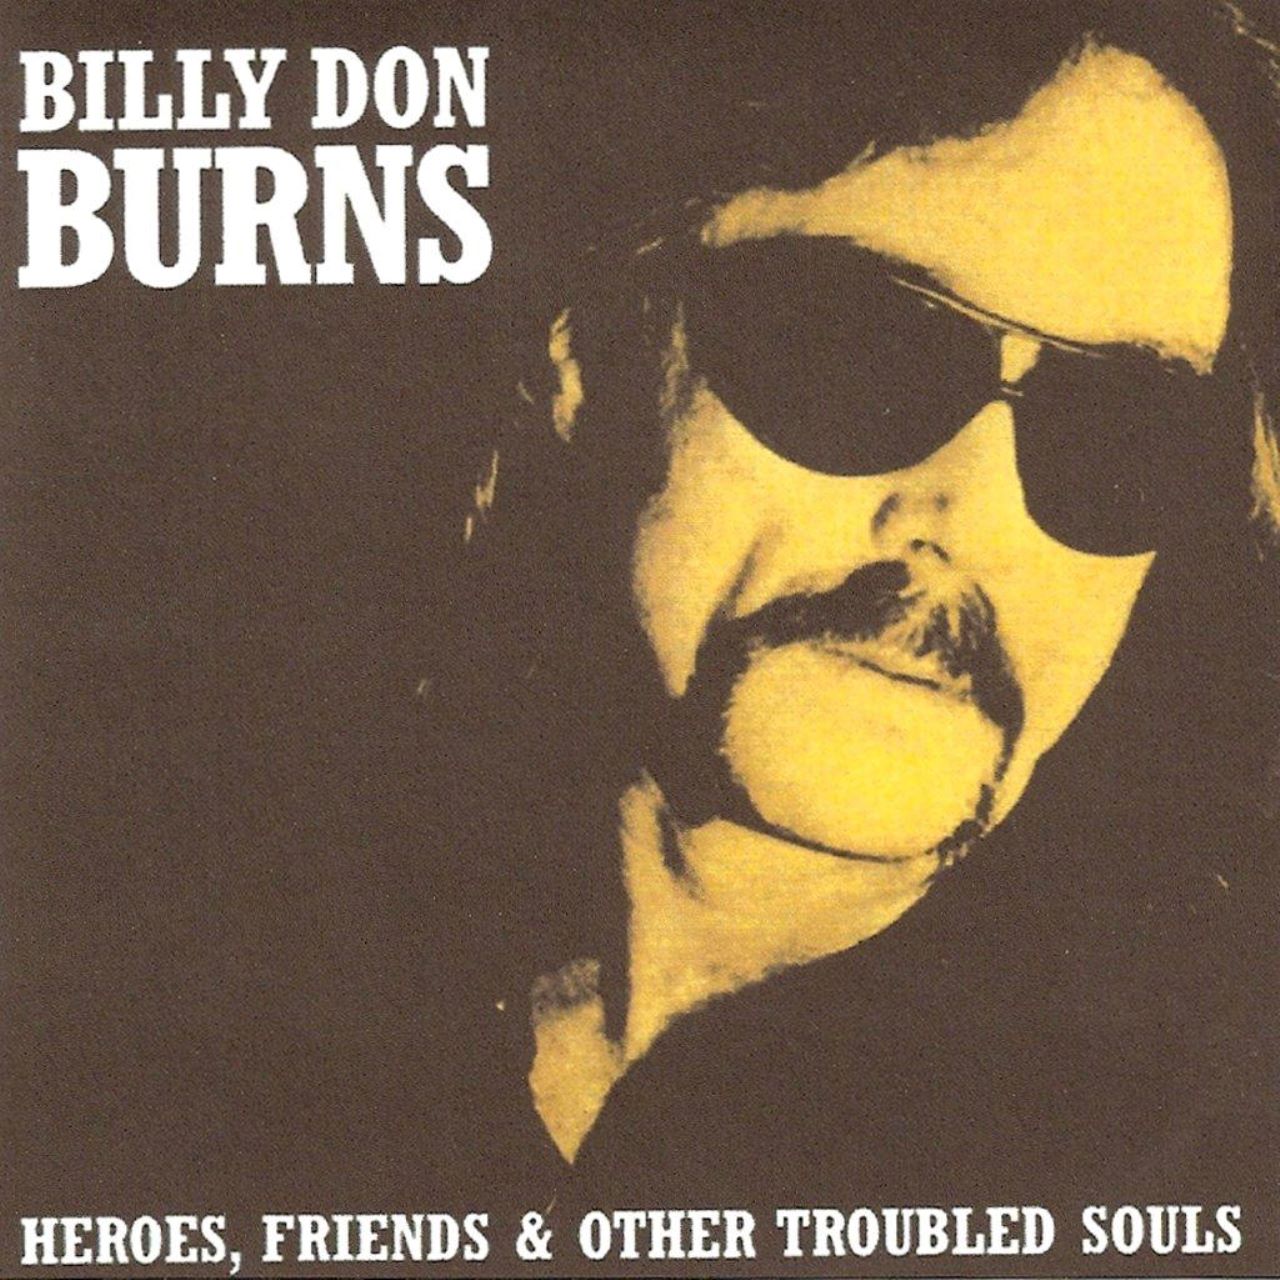 Billy Don Burns - Heroes, Friends & Other Troubled Souls cover album